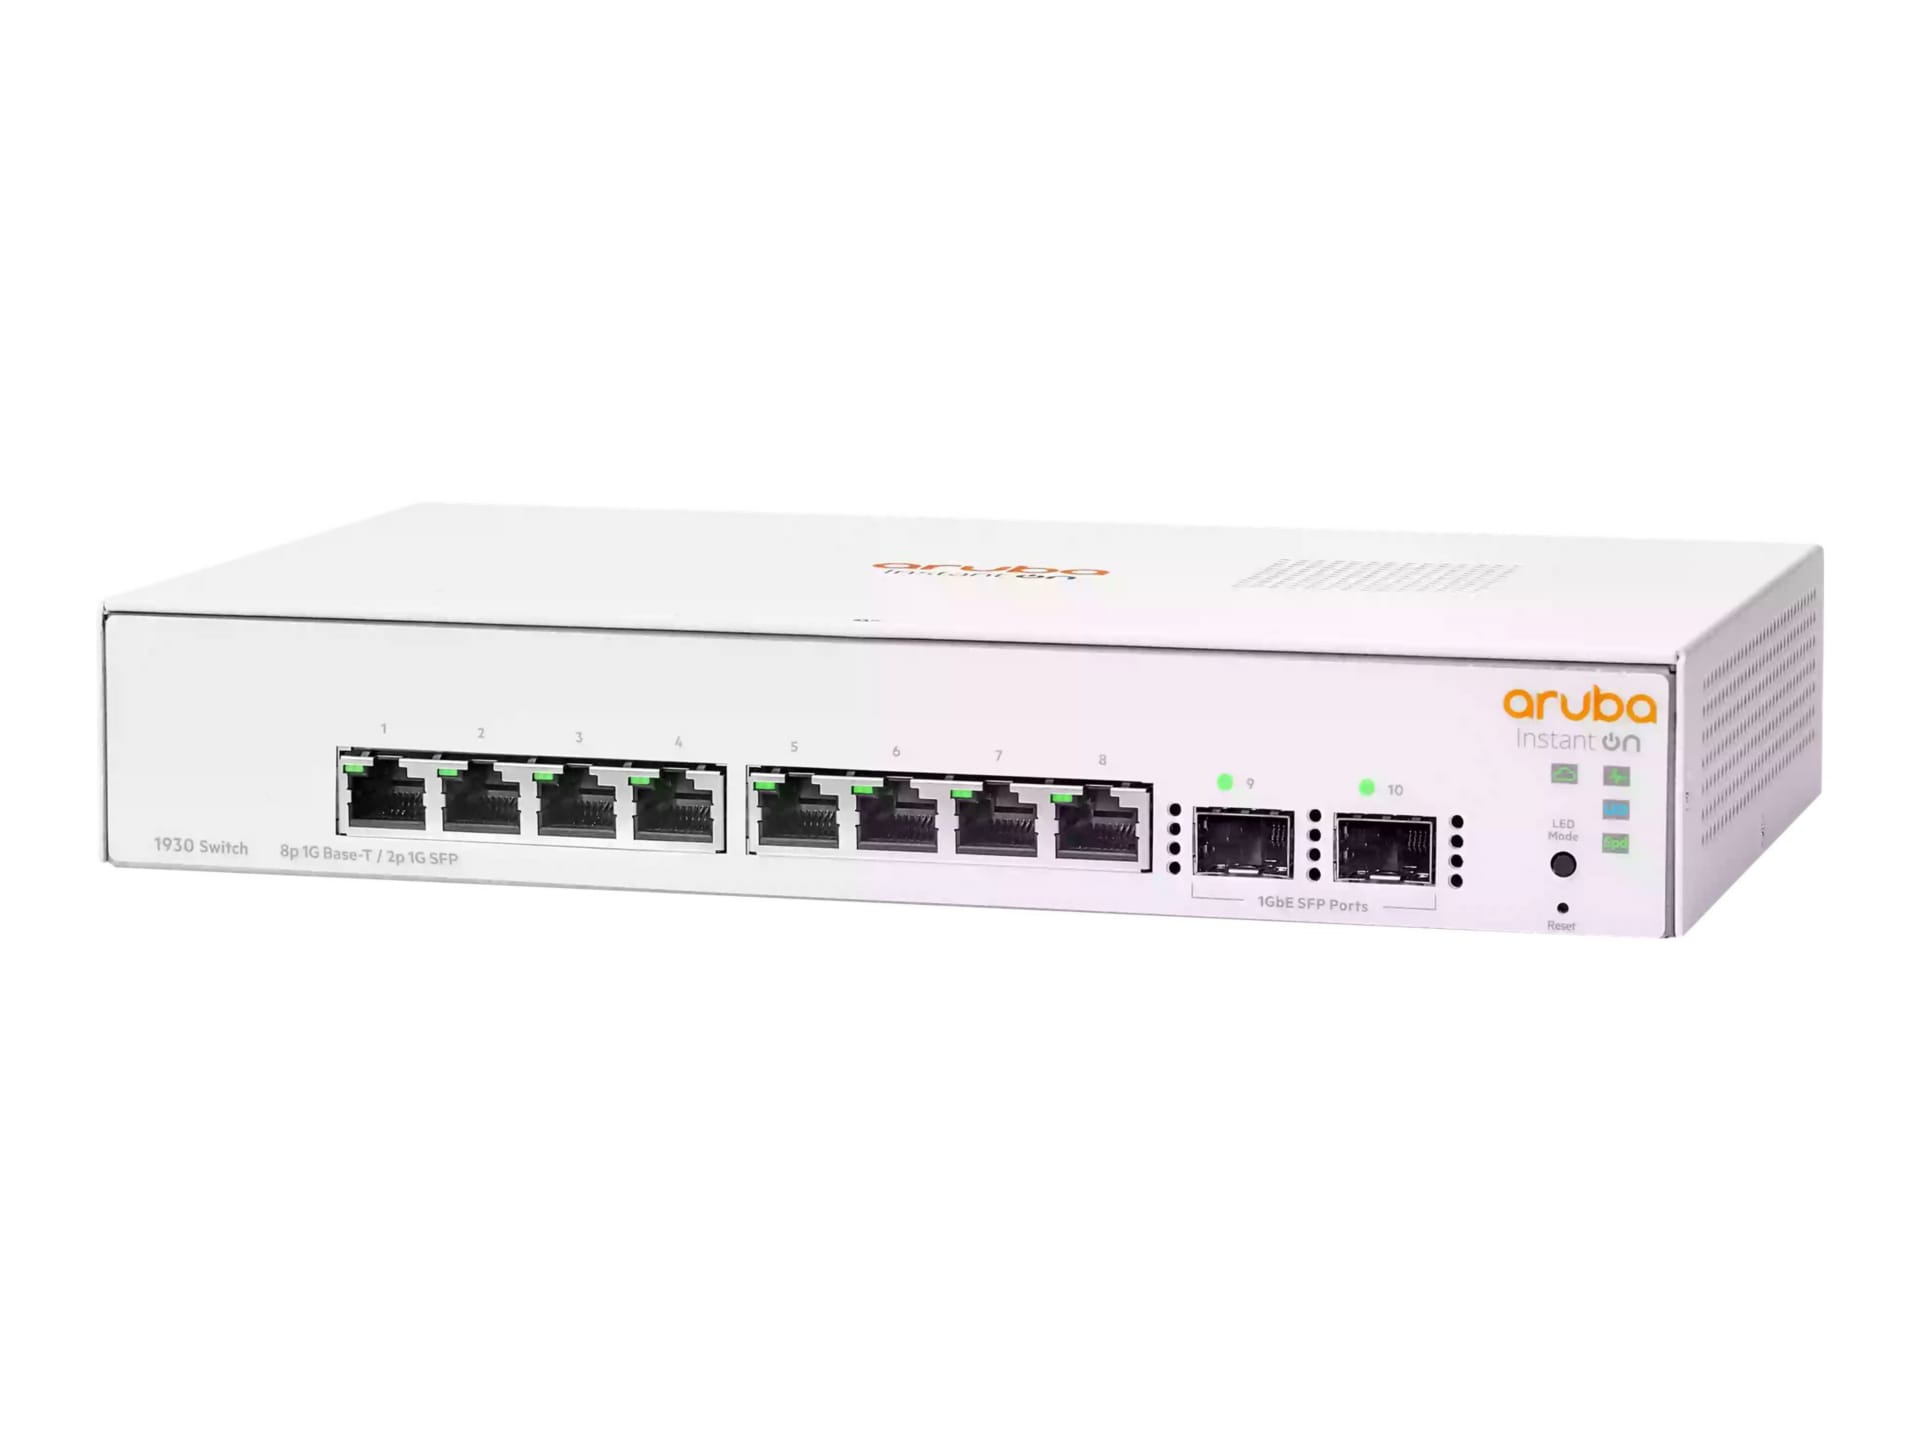 HPE HPE Networking Instant On 1930 8G 2SFP Switch - switch - 10 ports - managed